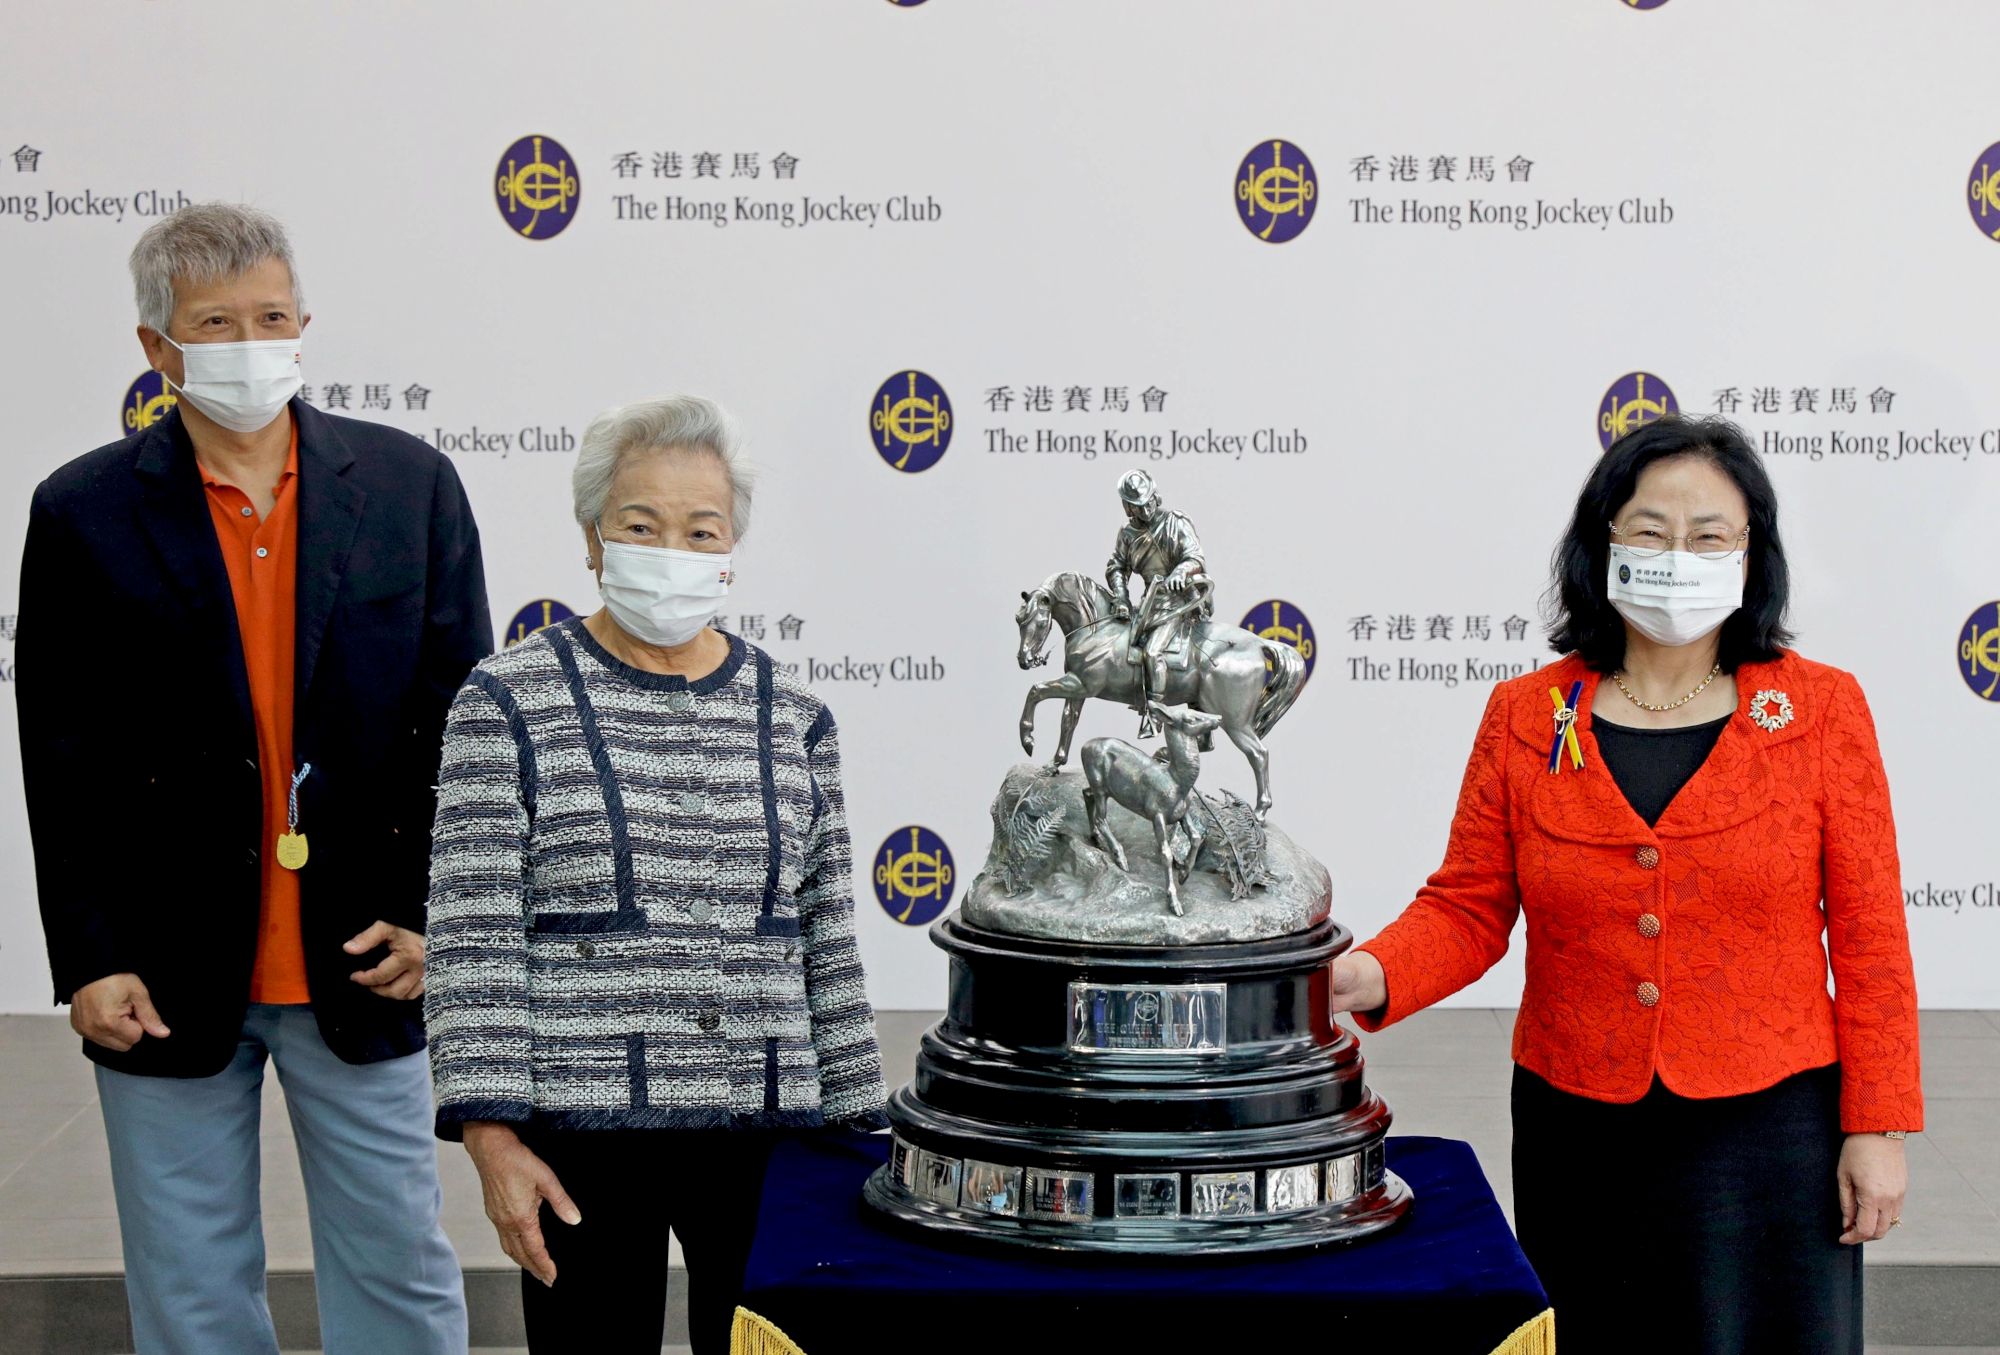 Club Steward Mrs Margaret Leung presents the trophy and silver dishes to the representatives of Willie May Syndicate, trainer Caspar Fownes and jockey Joao Moreira.